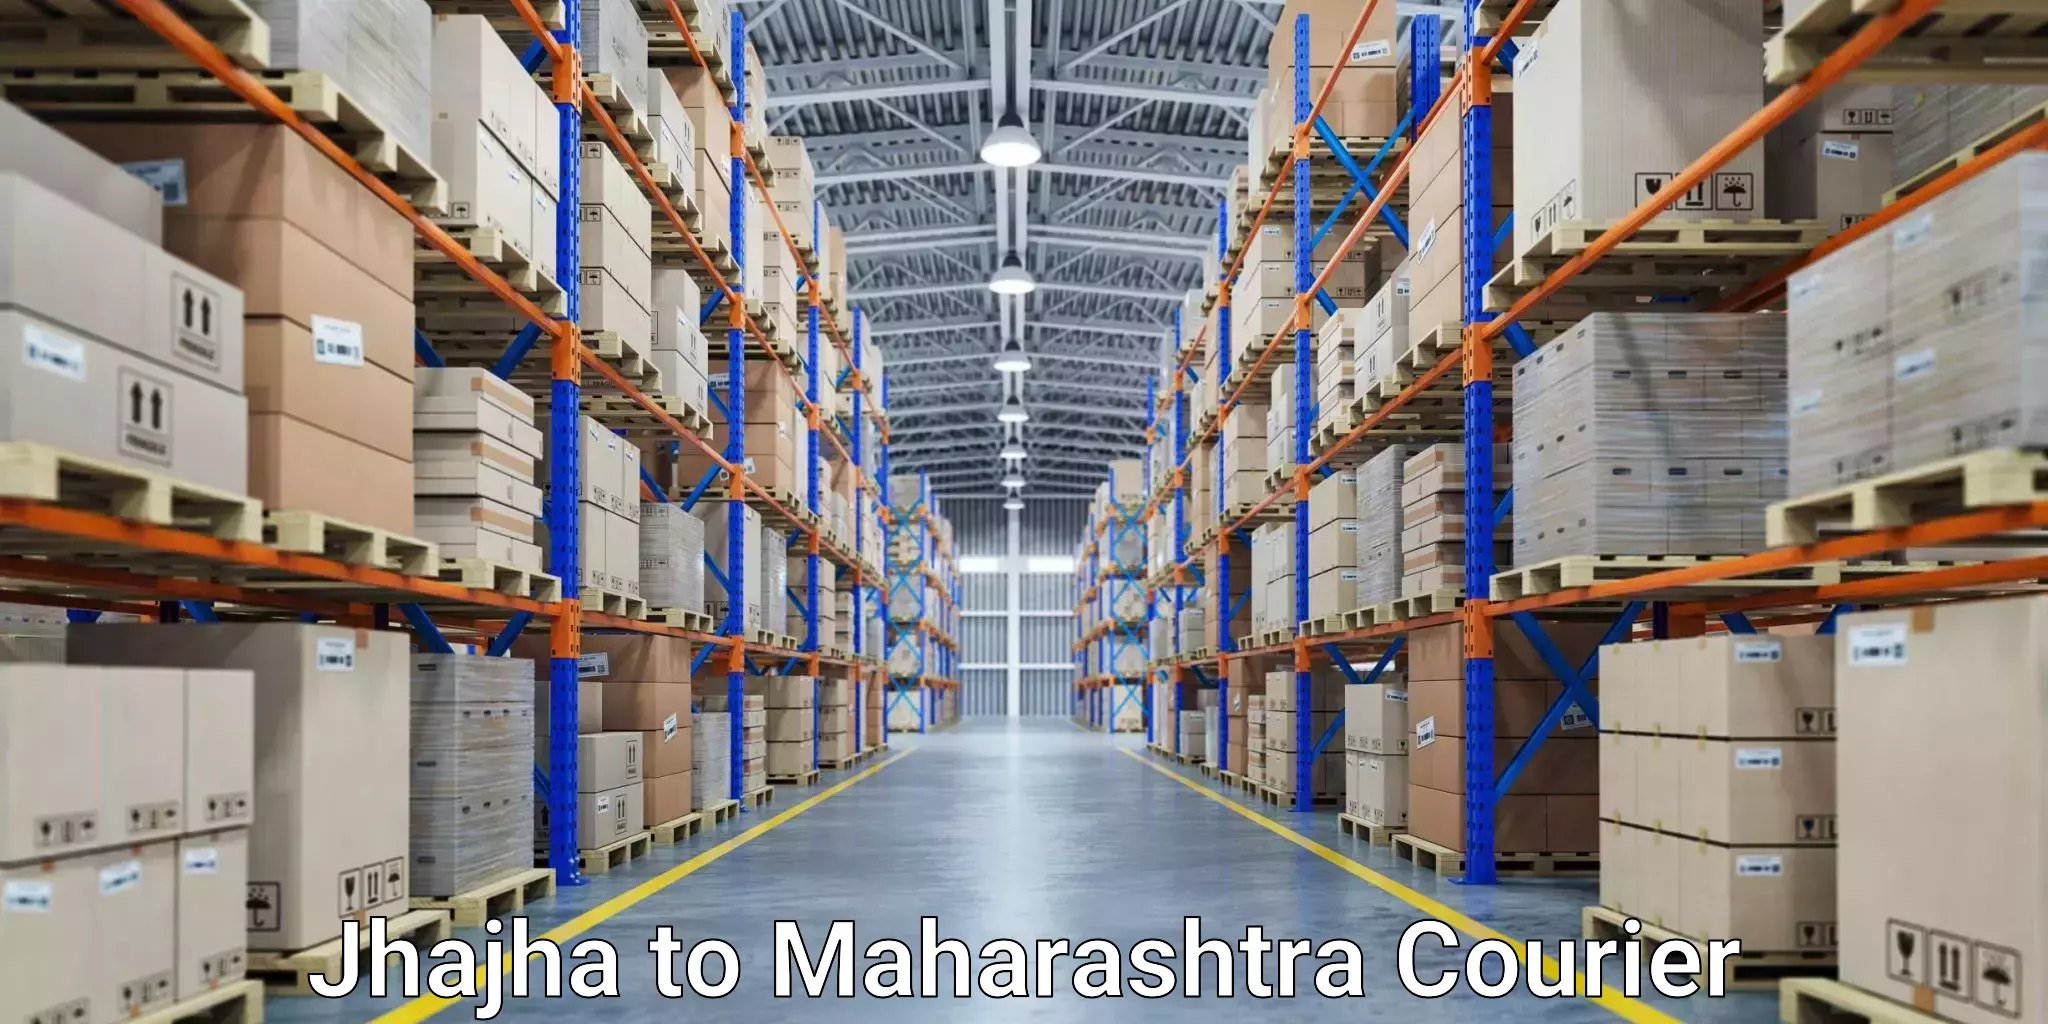 Flexible parcel services in Jhajha to Jalgaon